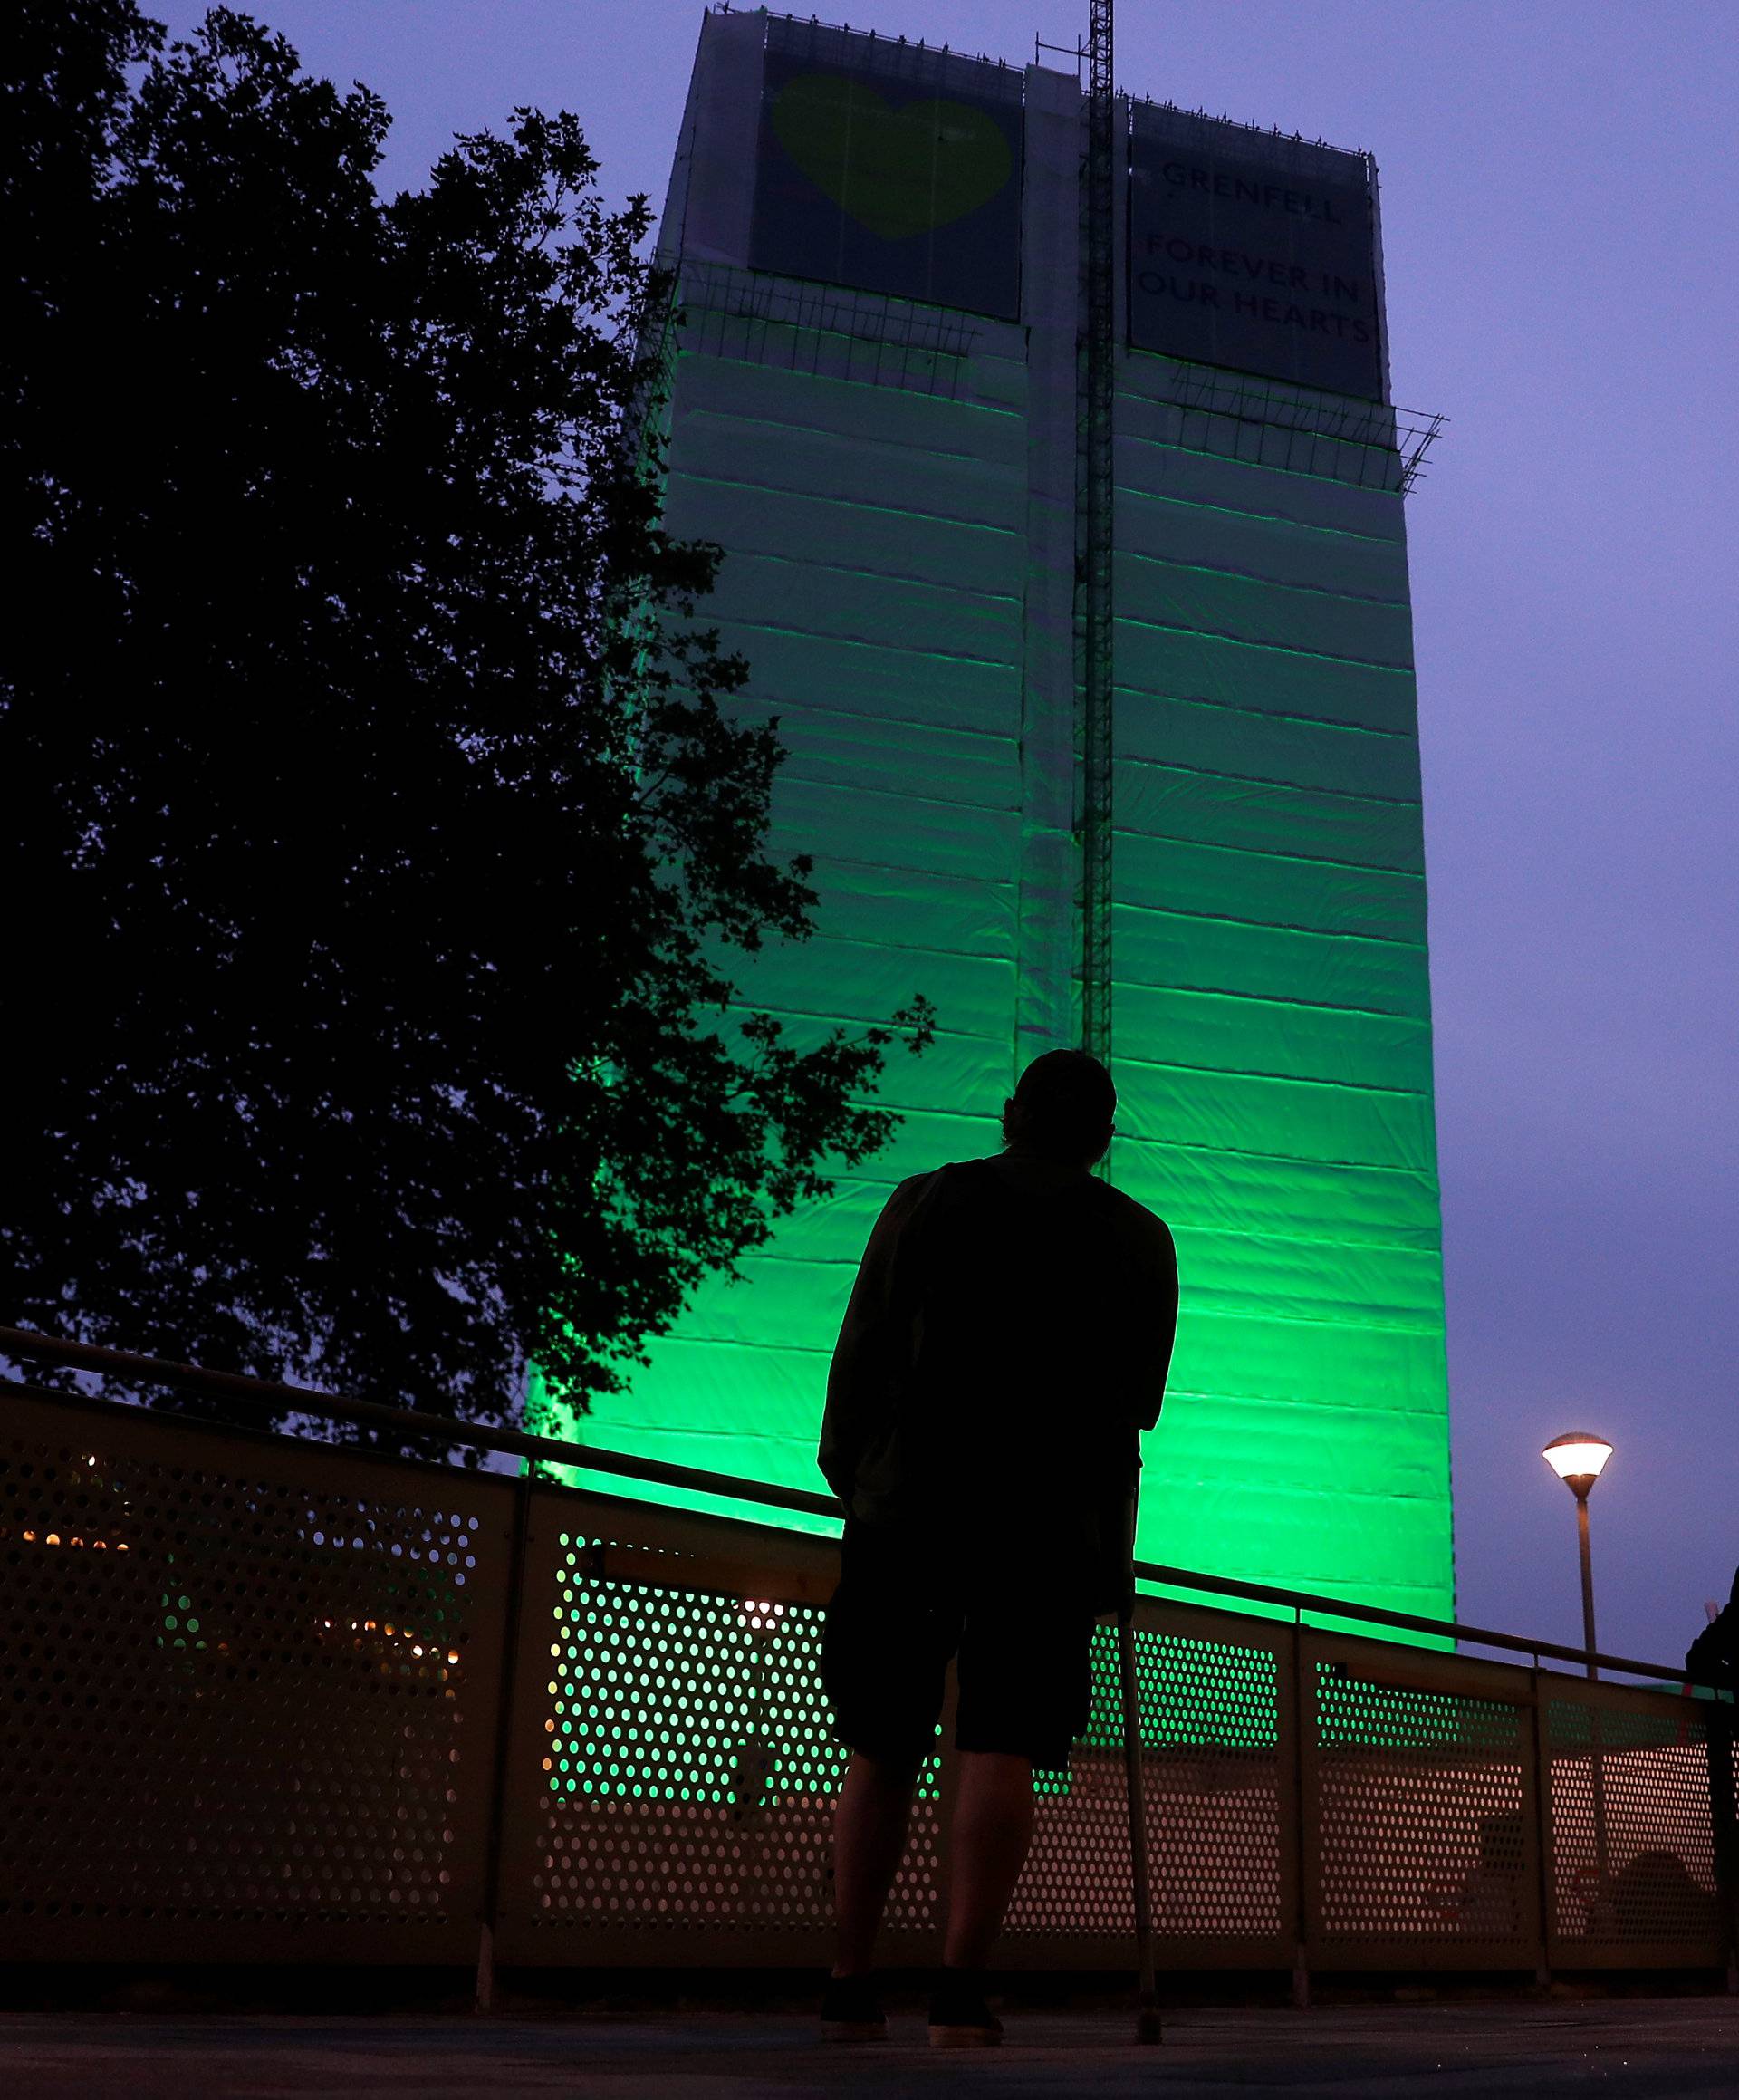 Grenfell Tower is seen covered and illuminated with green light one year after the tower fire in London